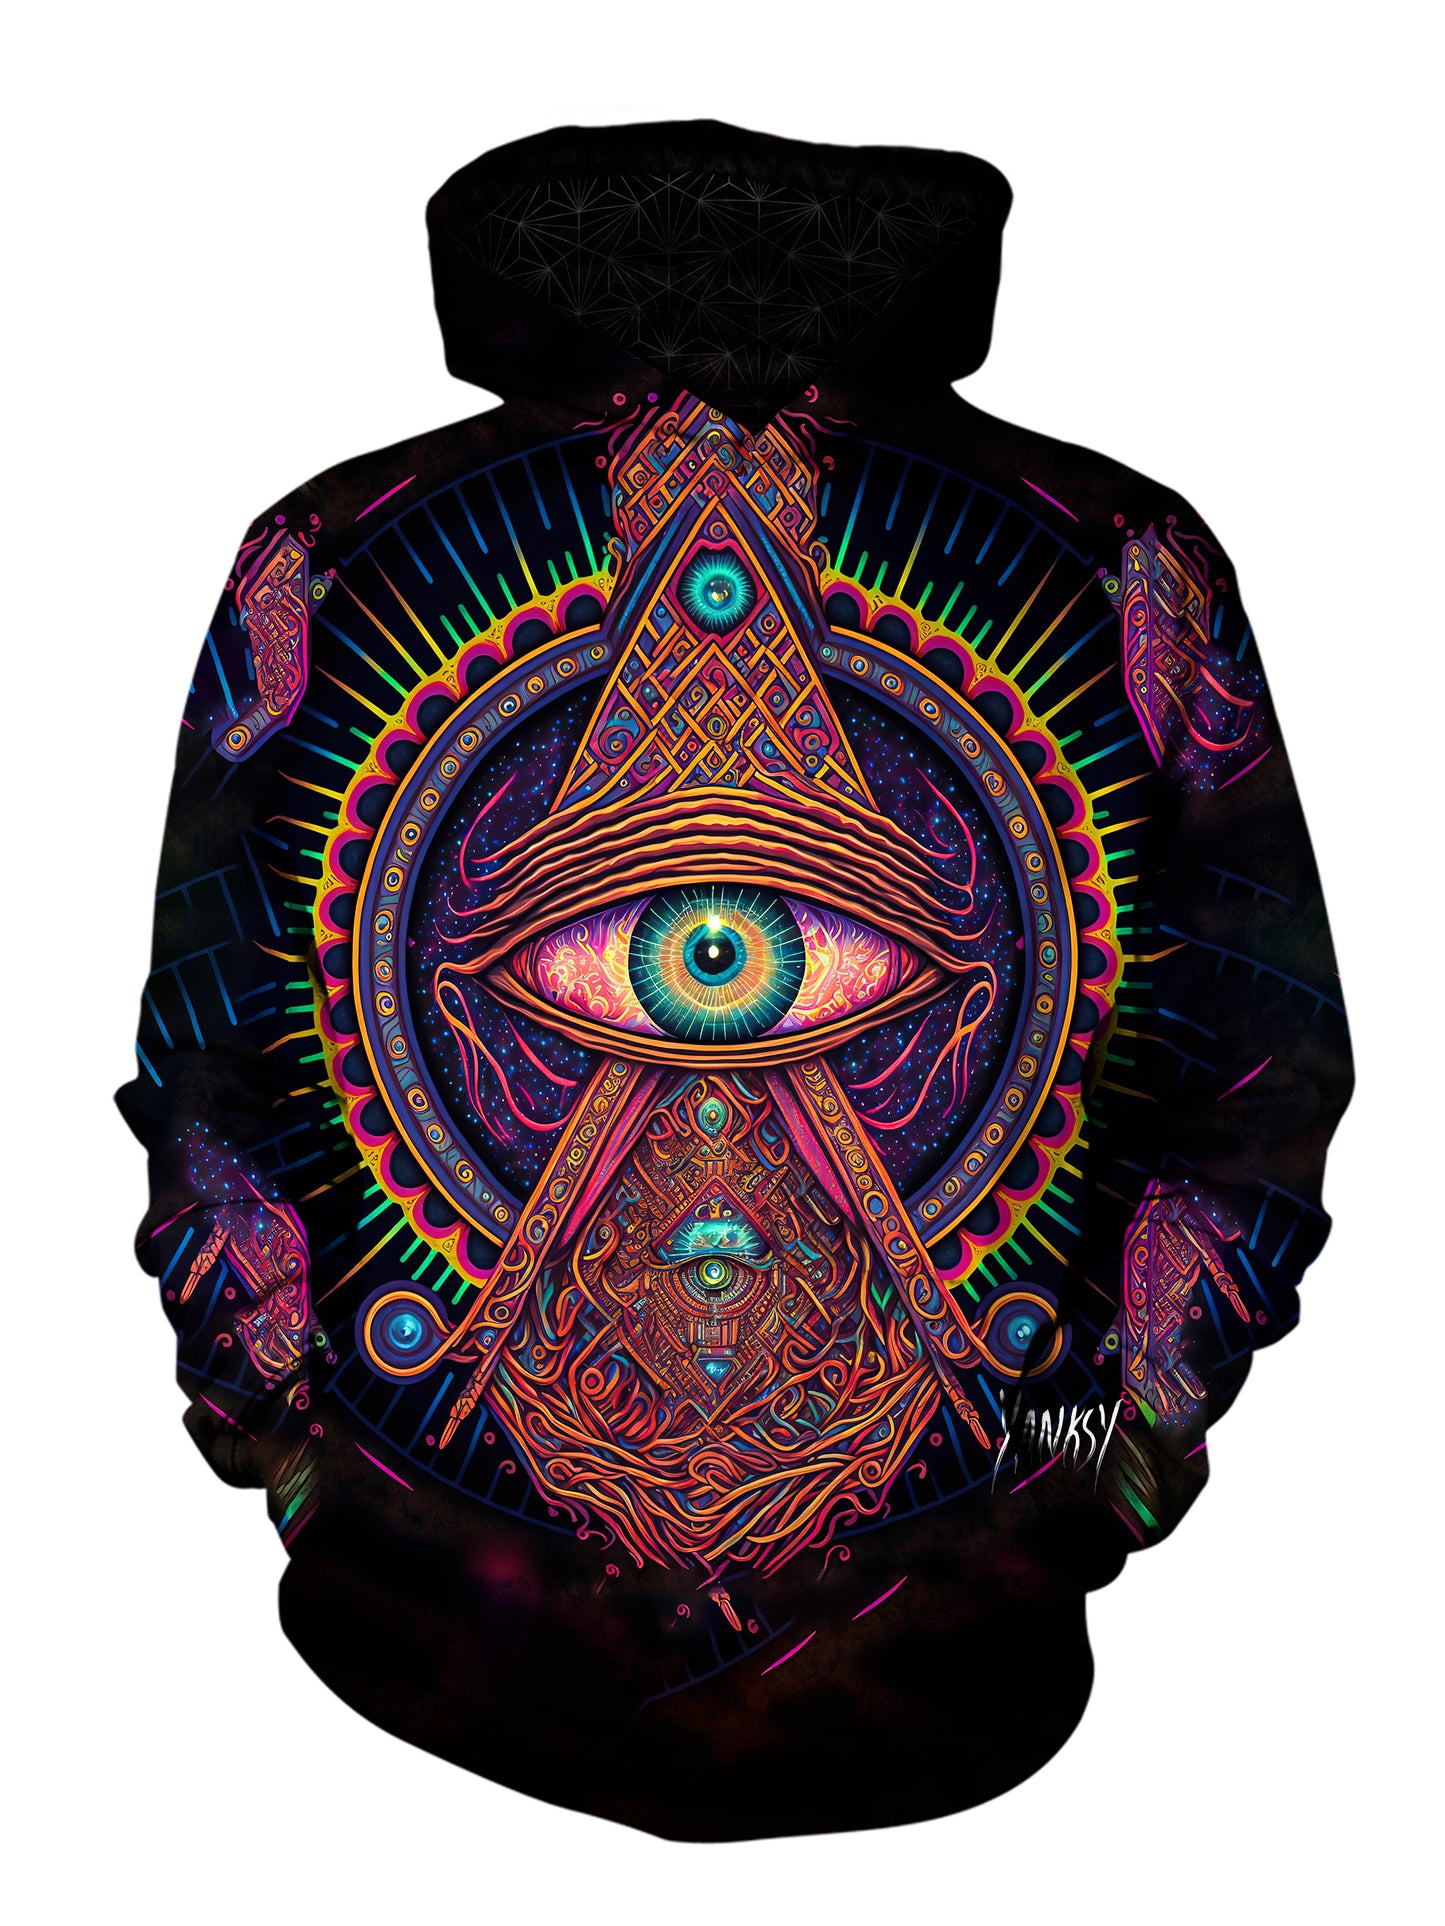 dance the night away in this ultra-comfortable pullover hoodie